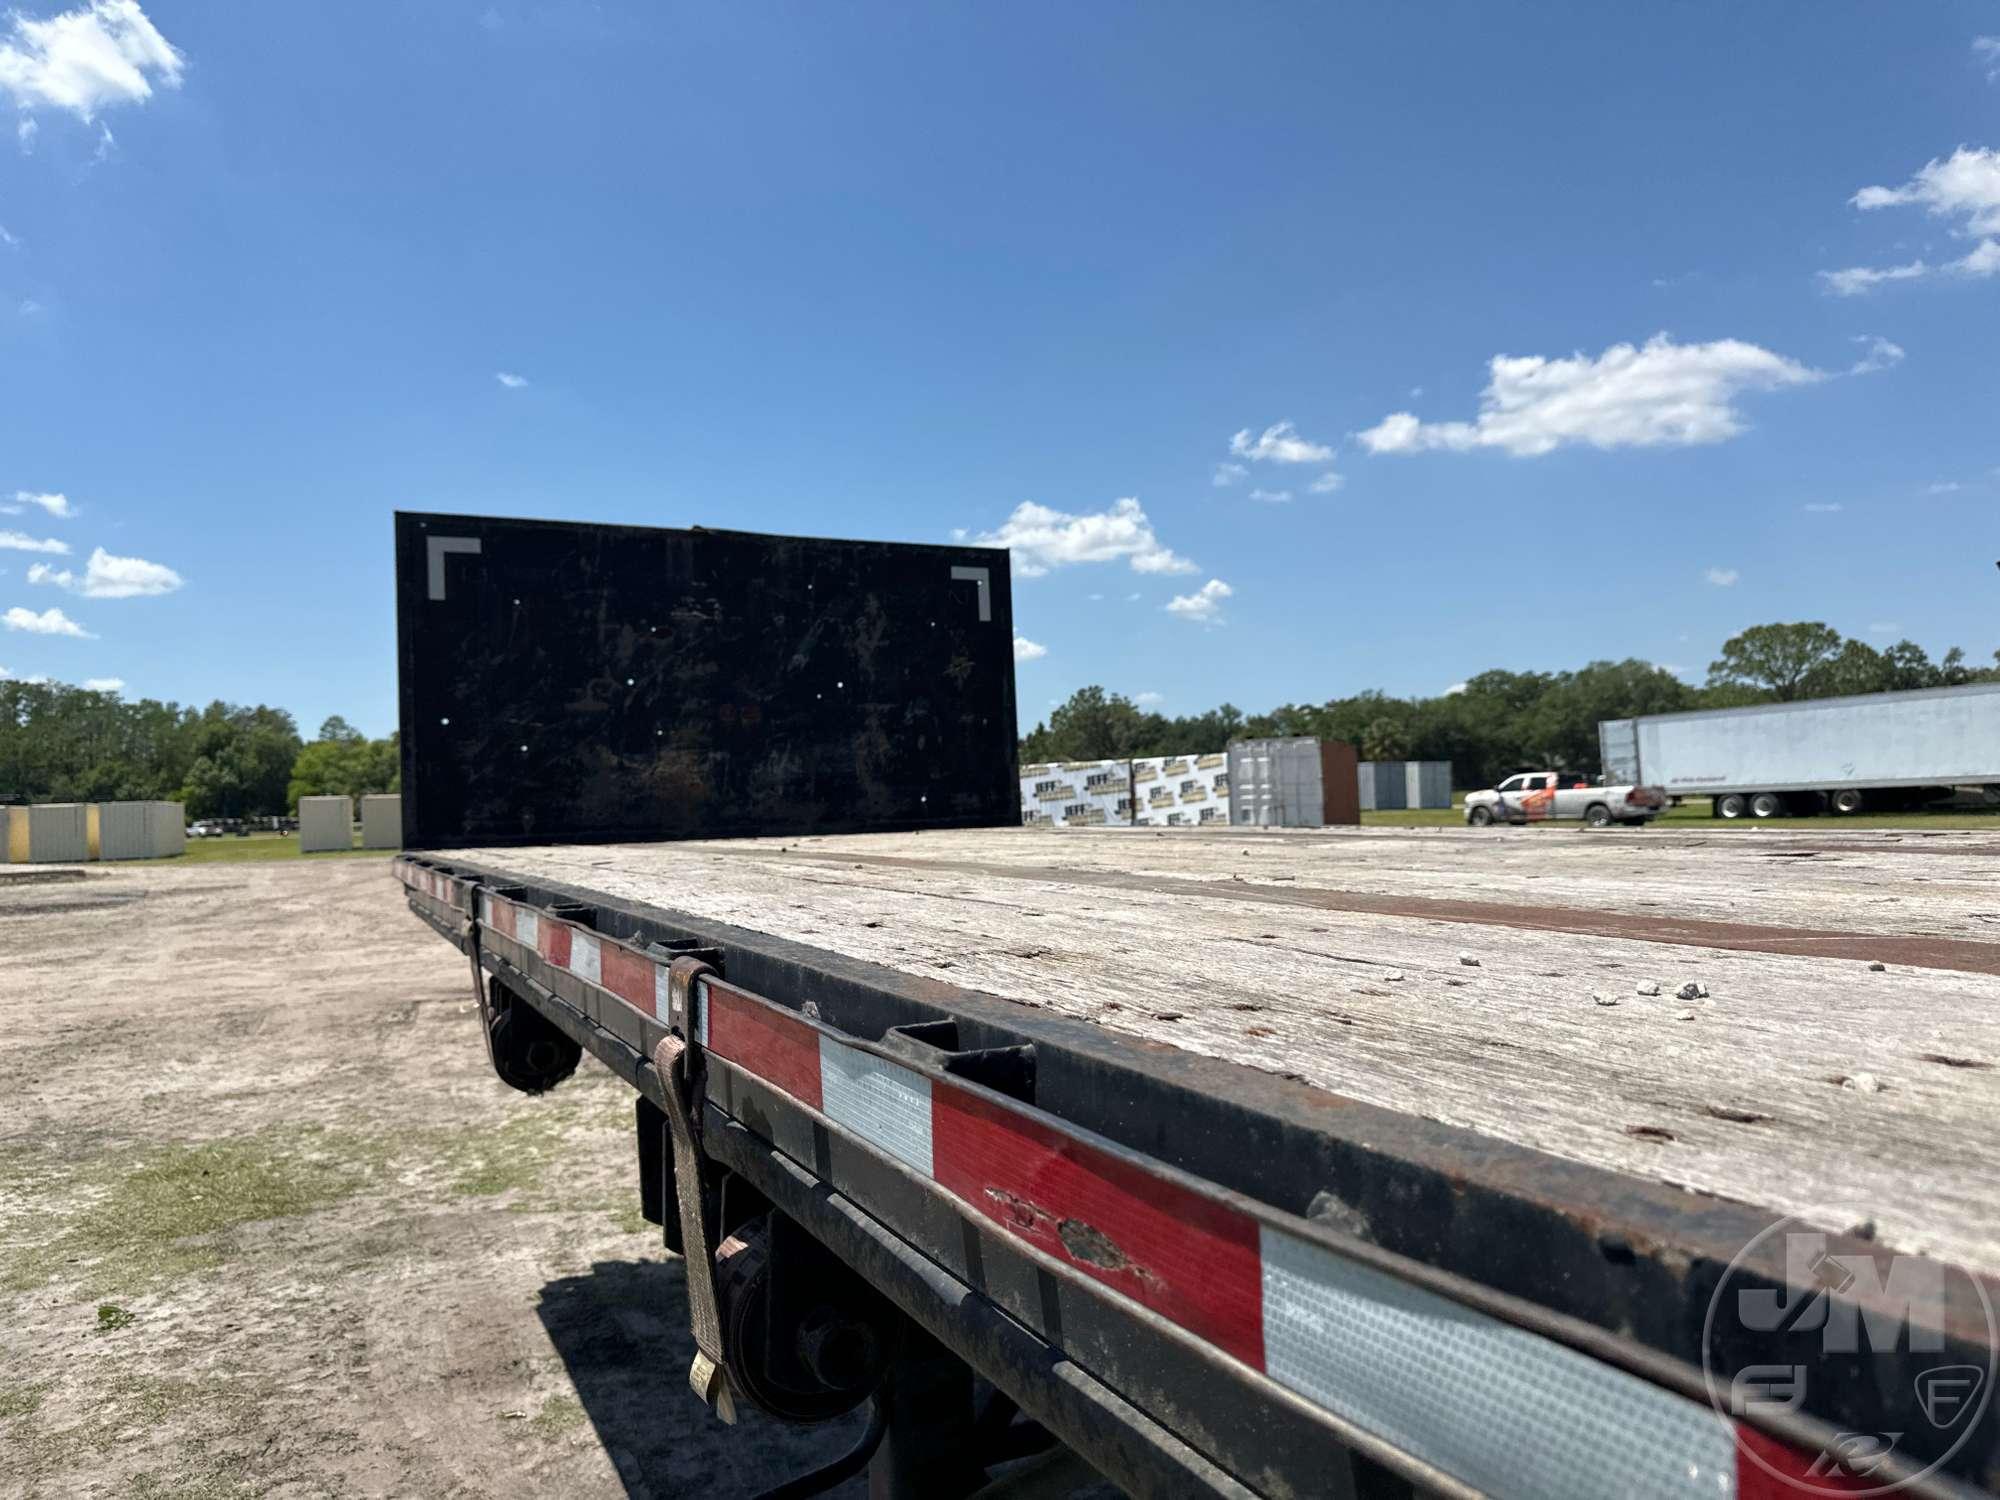 2007 FONTAINE TRAILER CO. FTW-5-8048WSAW 45'X102" STEEL FLATBED VIN: 13N14830271534765